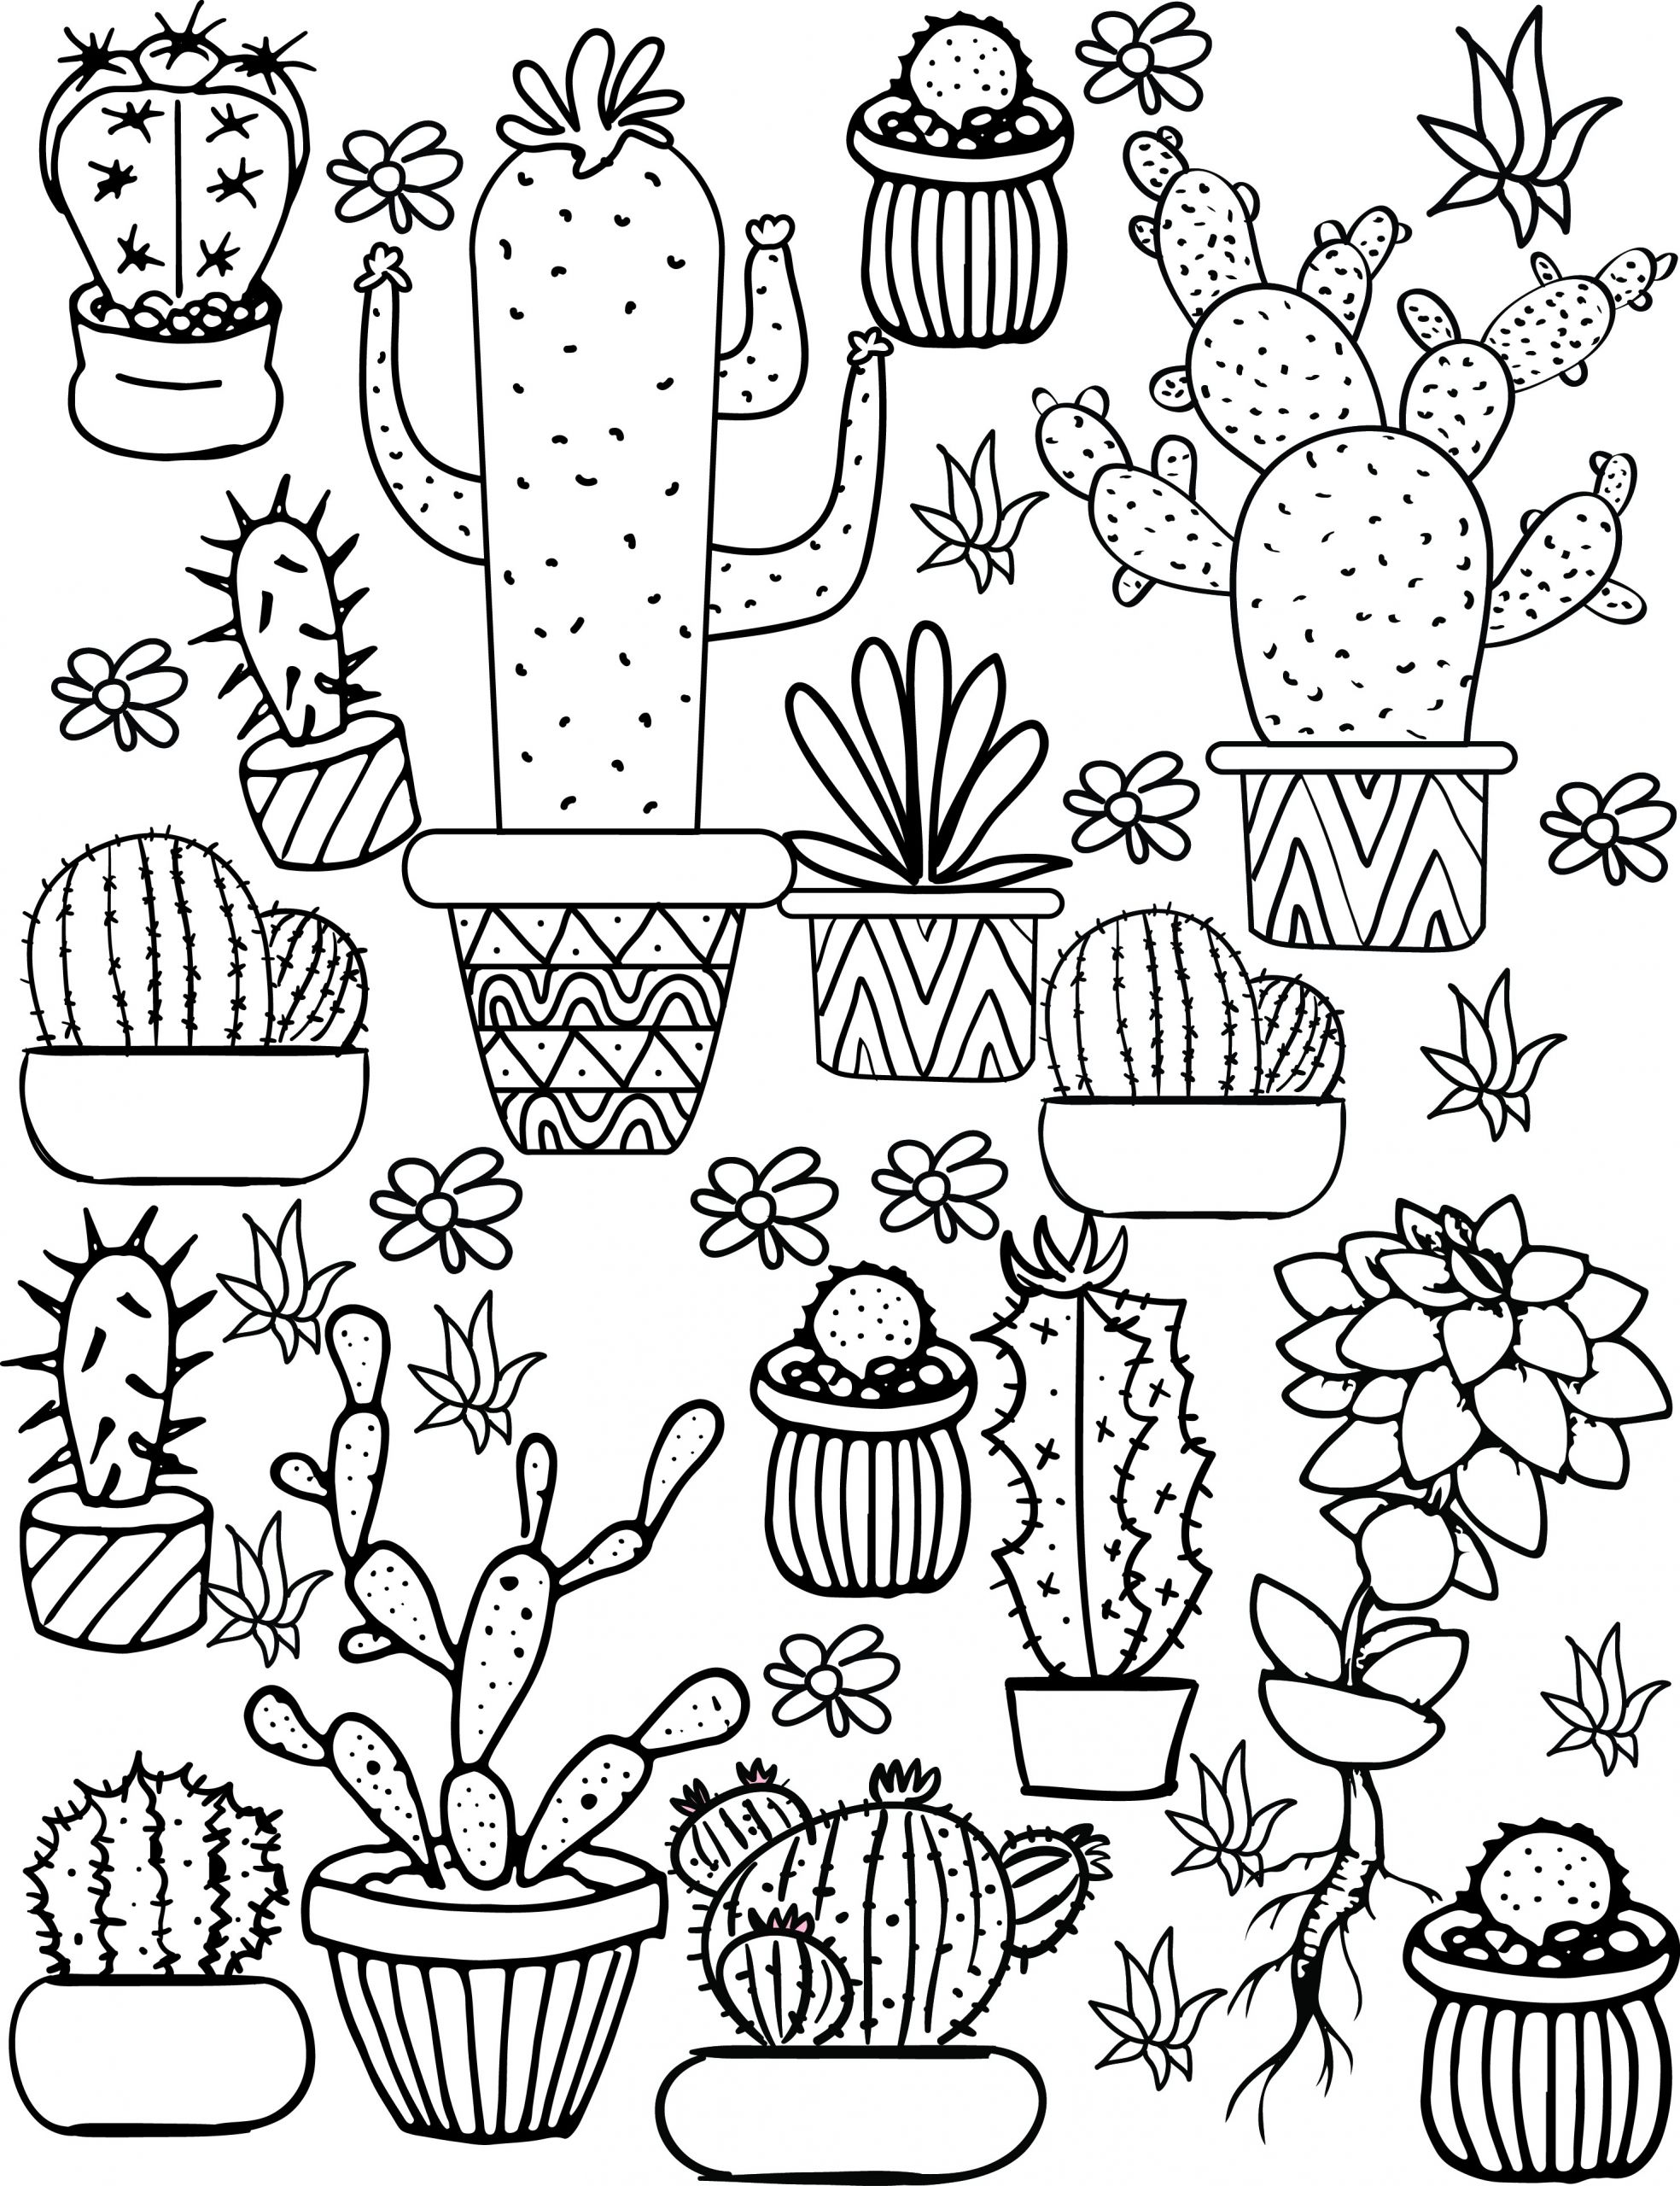 Cute Coloring Pages For Adults
 Cute Coloring Pages Best Coloring Pages For Kids